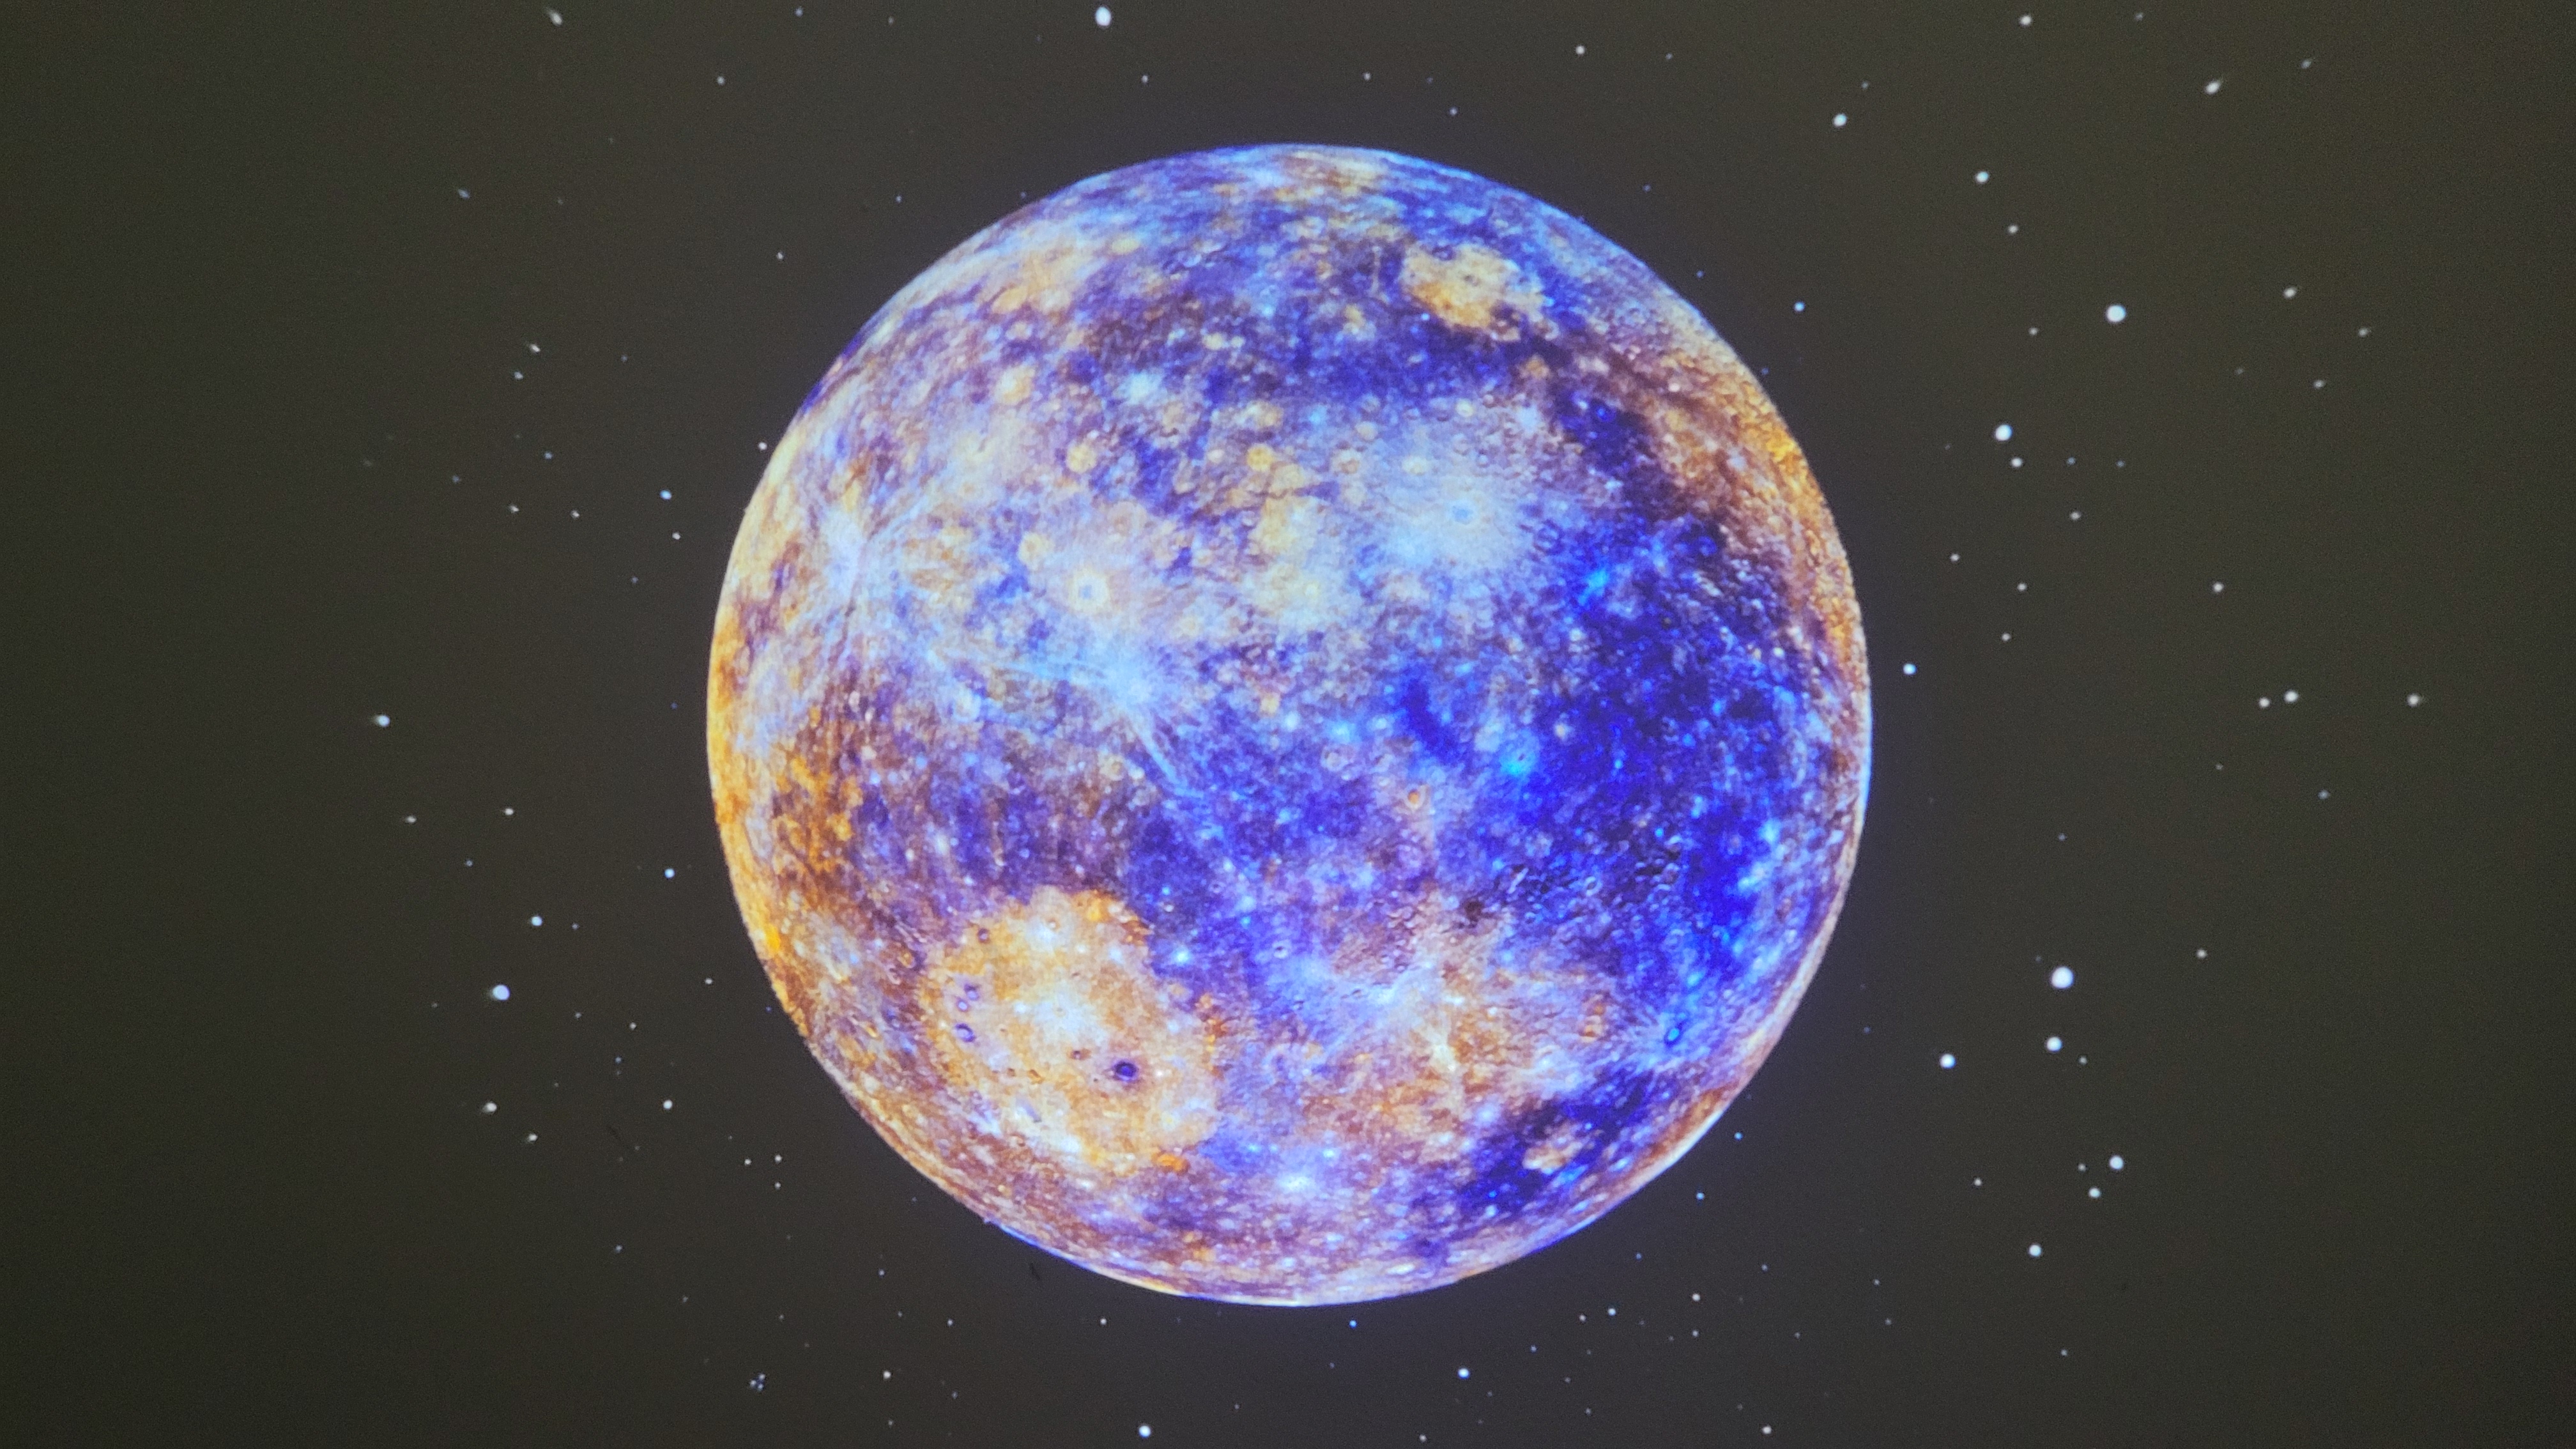 A projection of Mercury by the Pococo Galaxy Projector